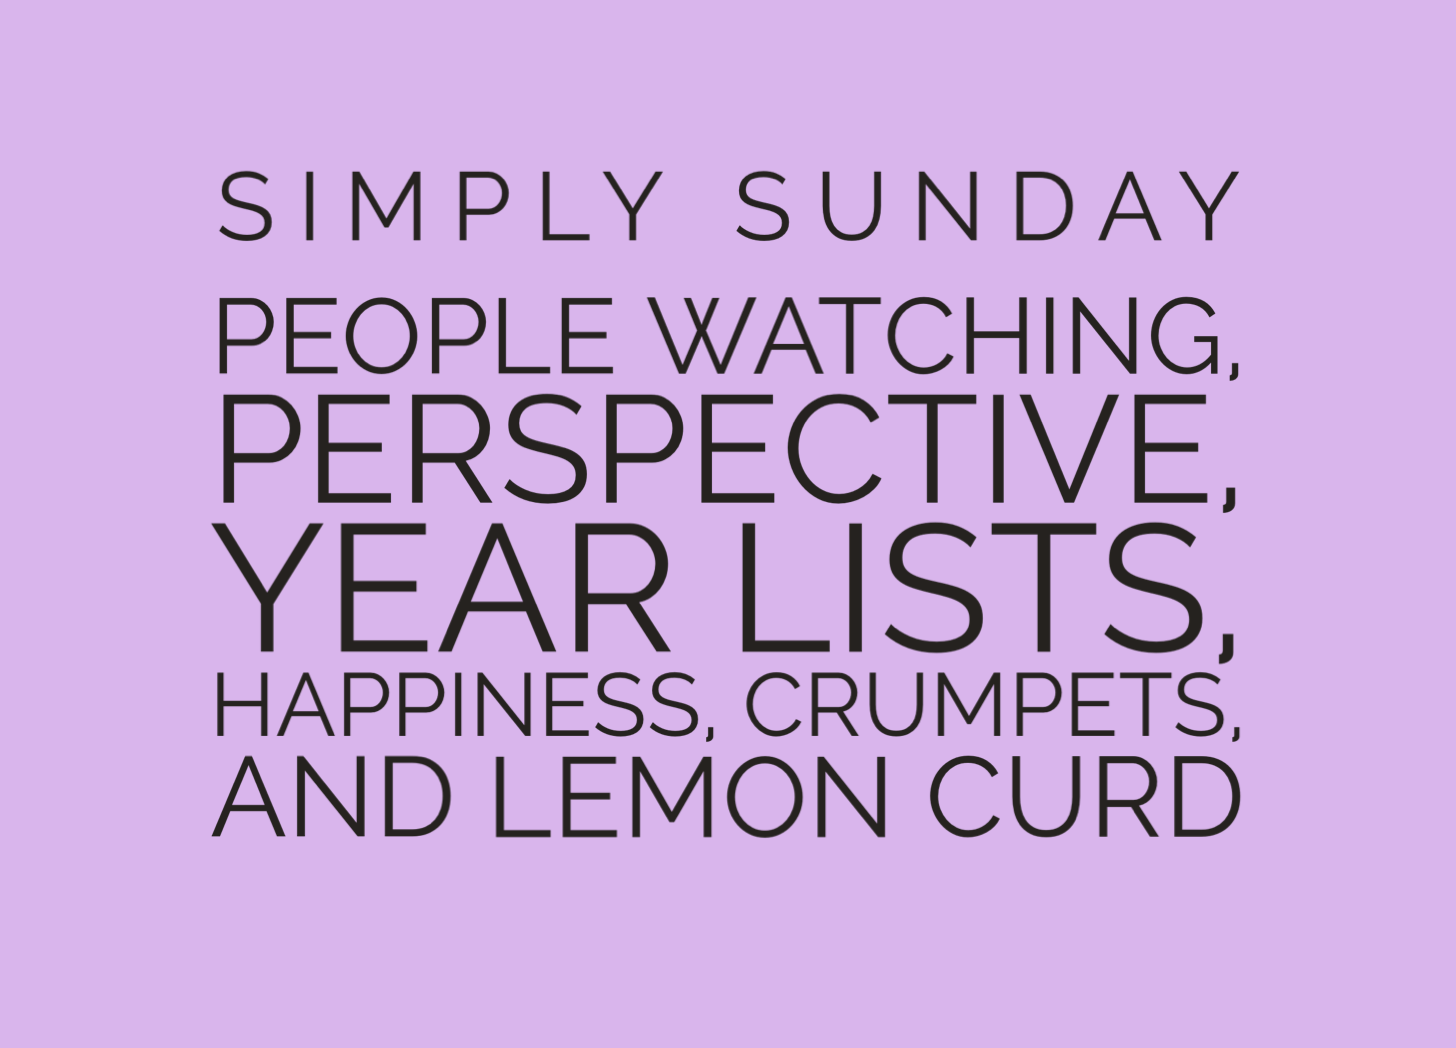 People watching, perspective, year lists, happiness, crumpets, and lemon curd